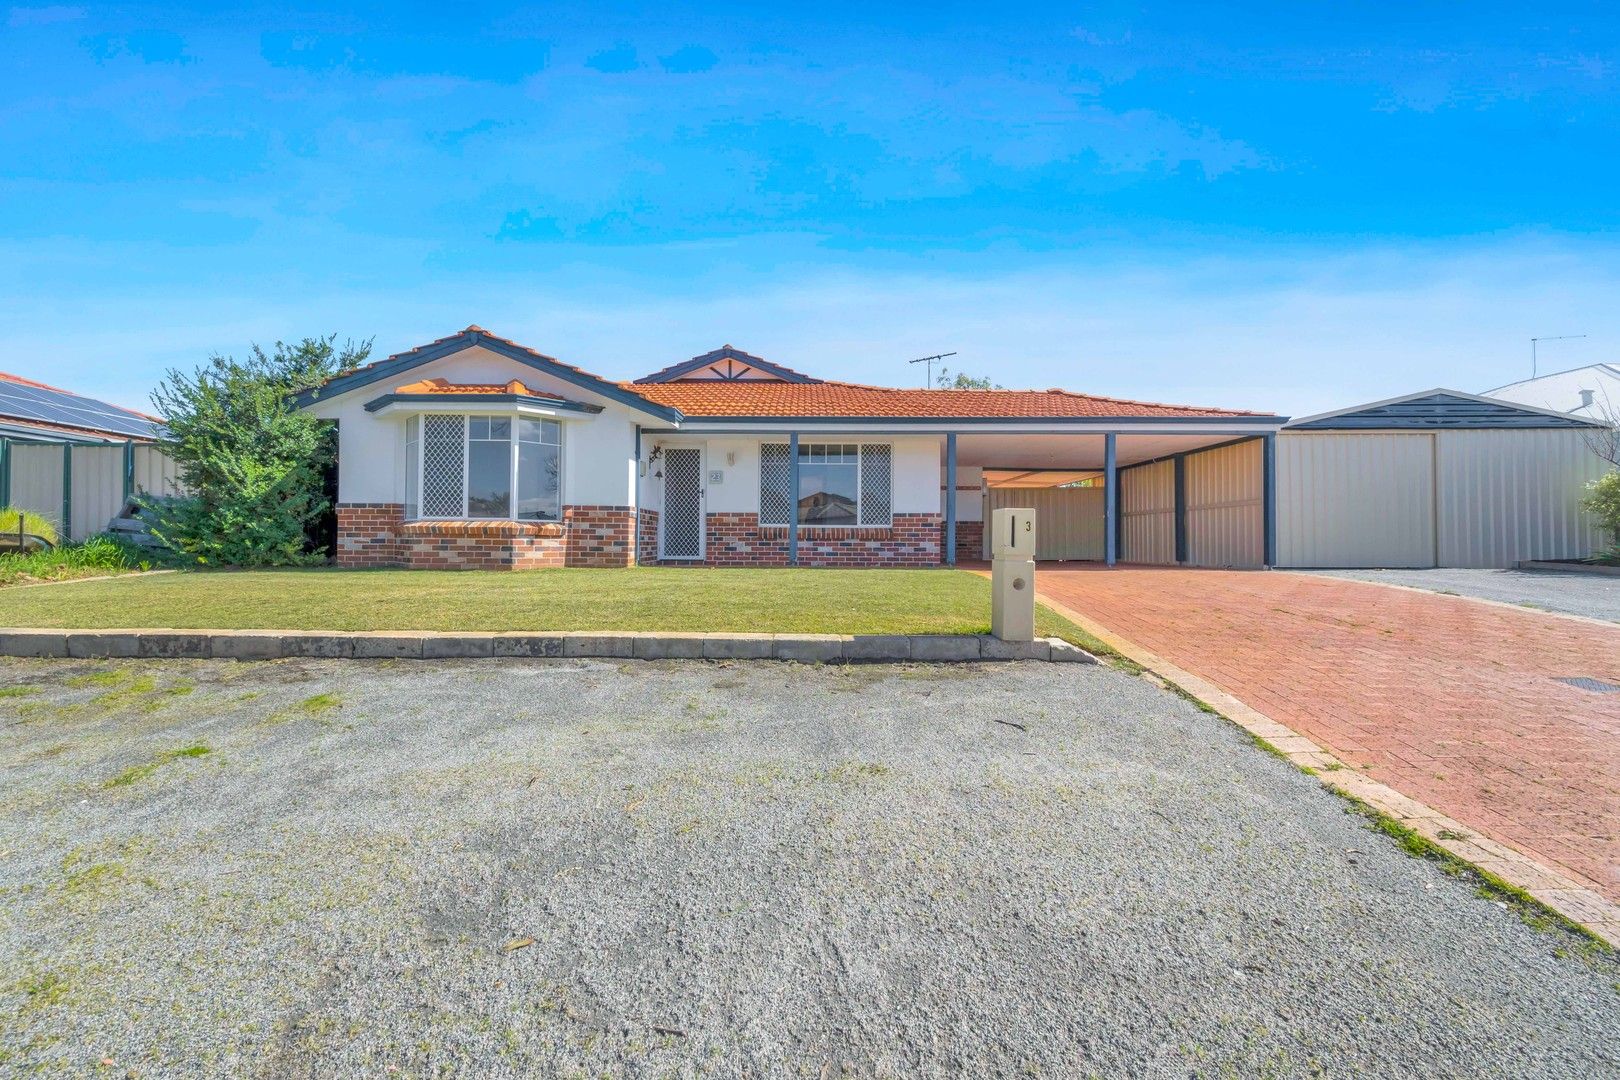 4 bedrooms House in 23 Federation Drive SINGLETON WA, 6175